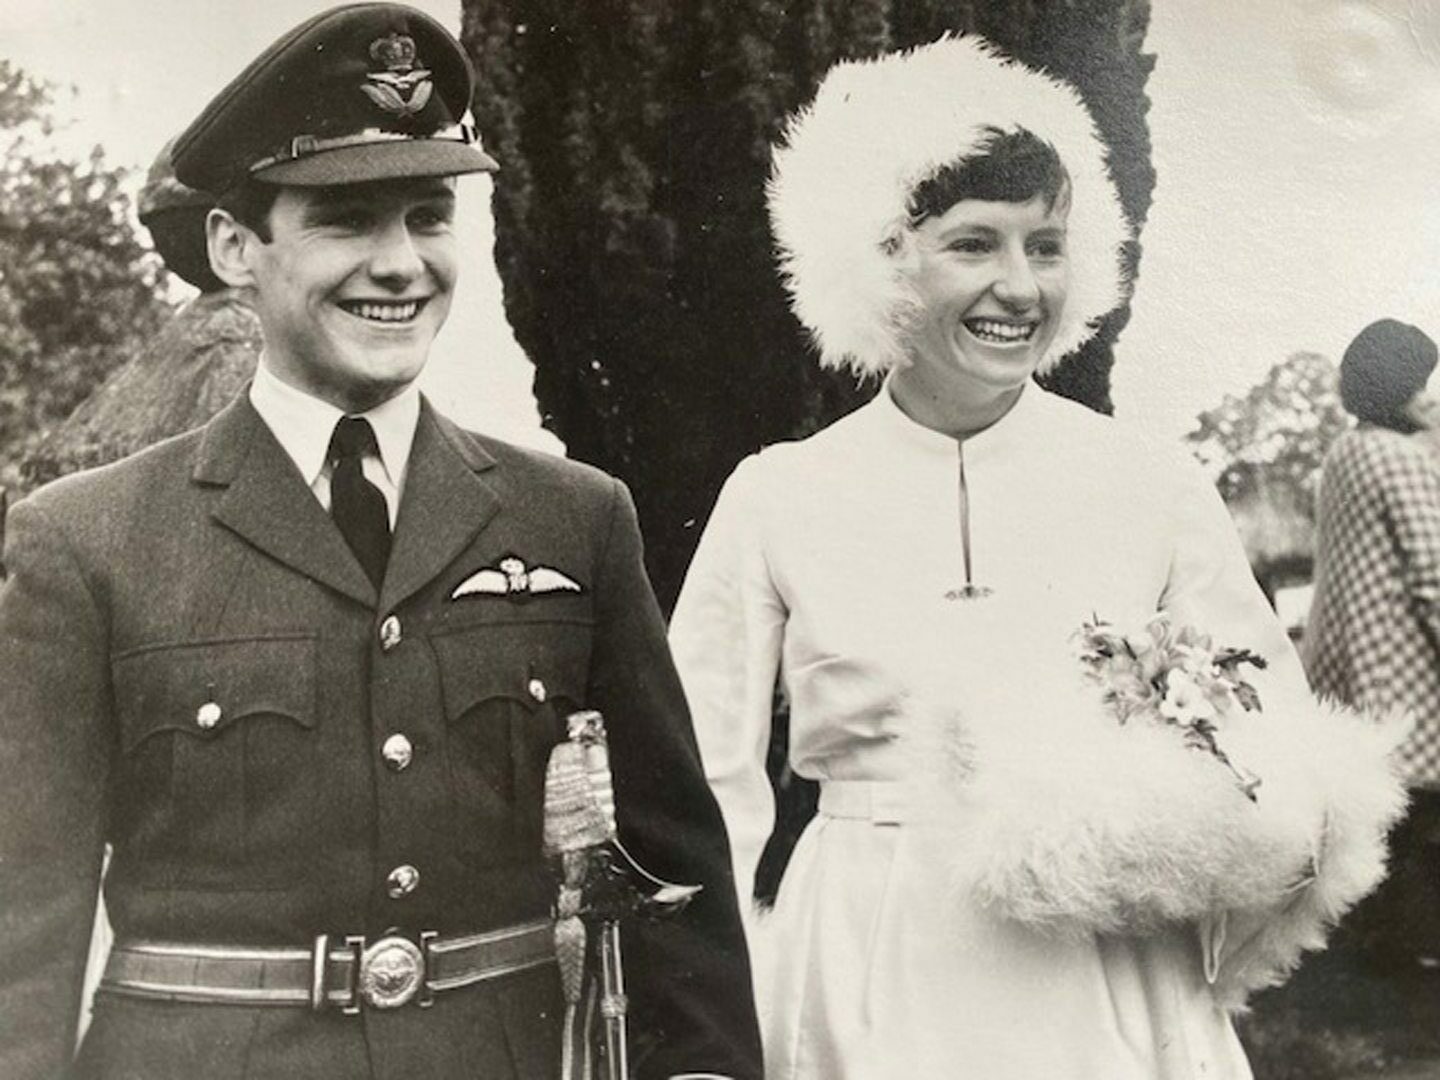 Pictured in 1969 on their wedding day, Sandy and Glennis Duthie.